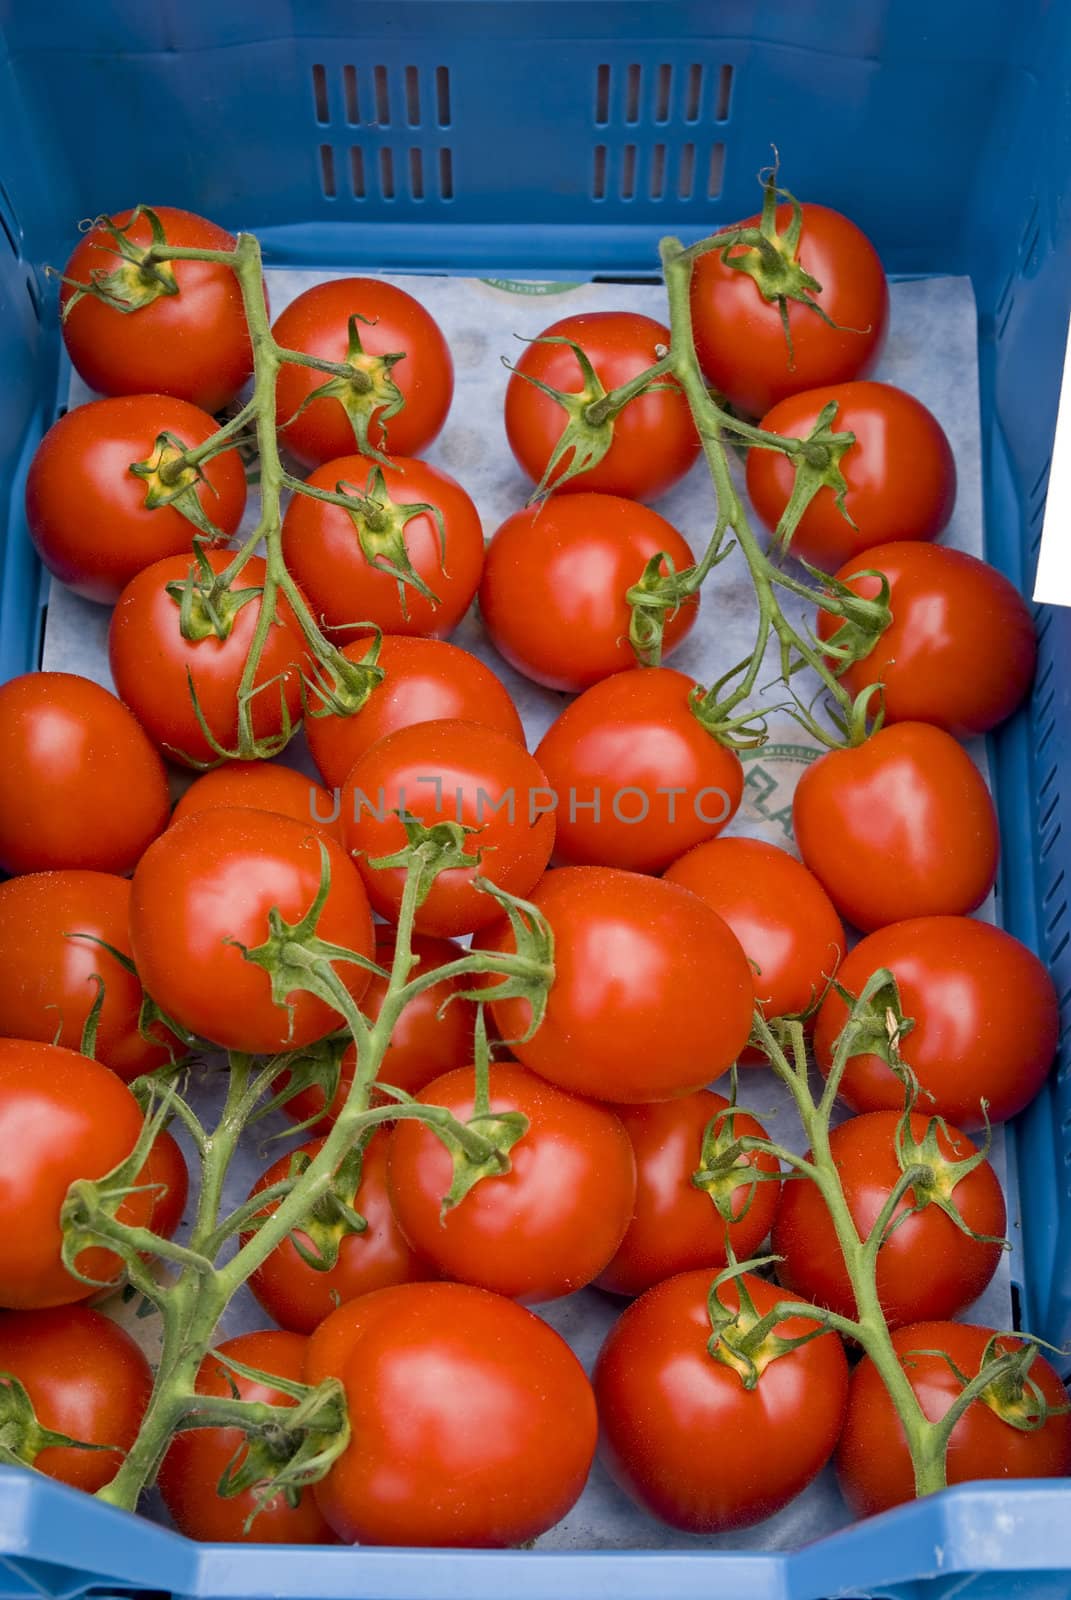 A few rows of red tomatoes in blue box